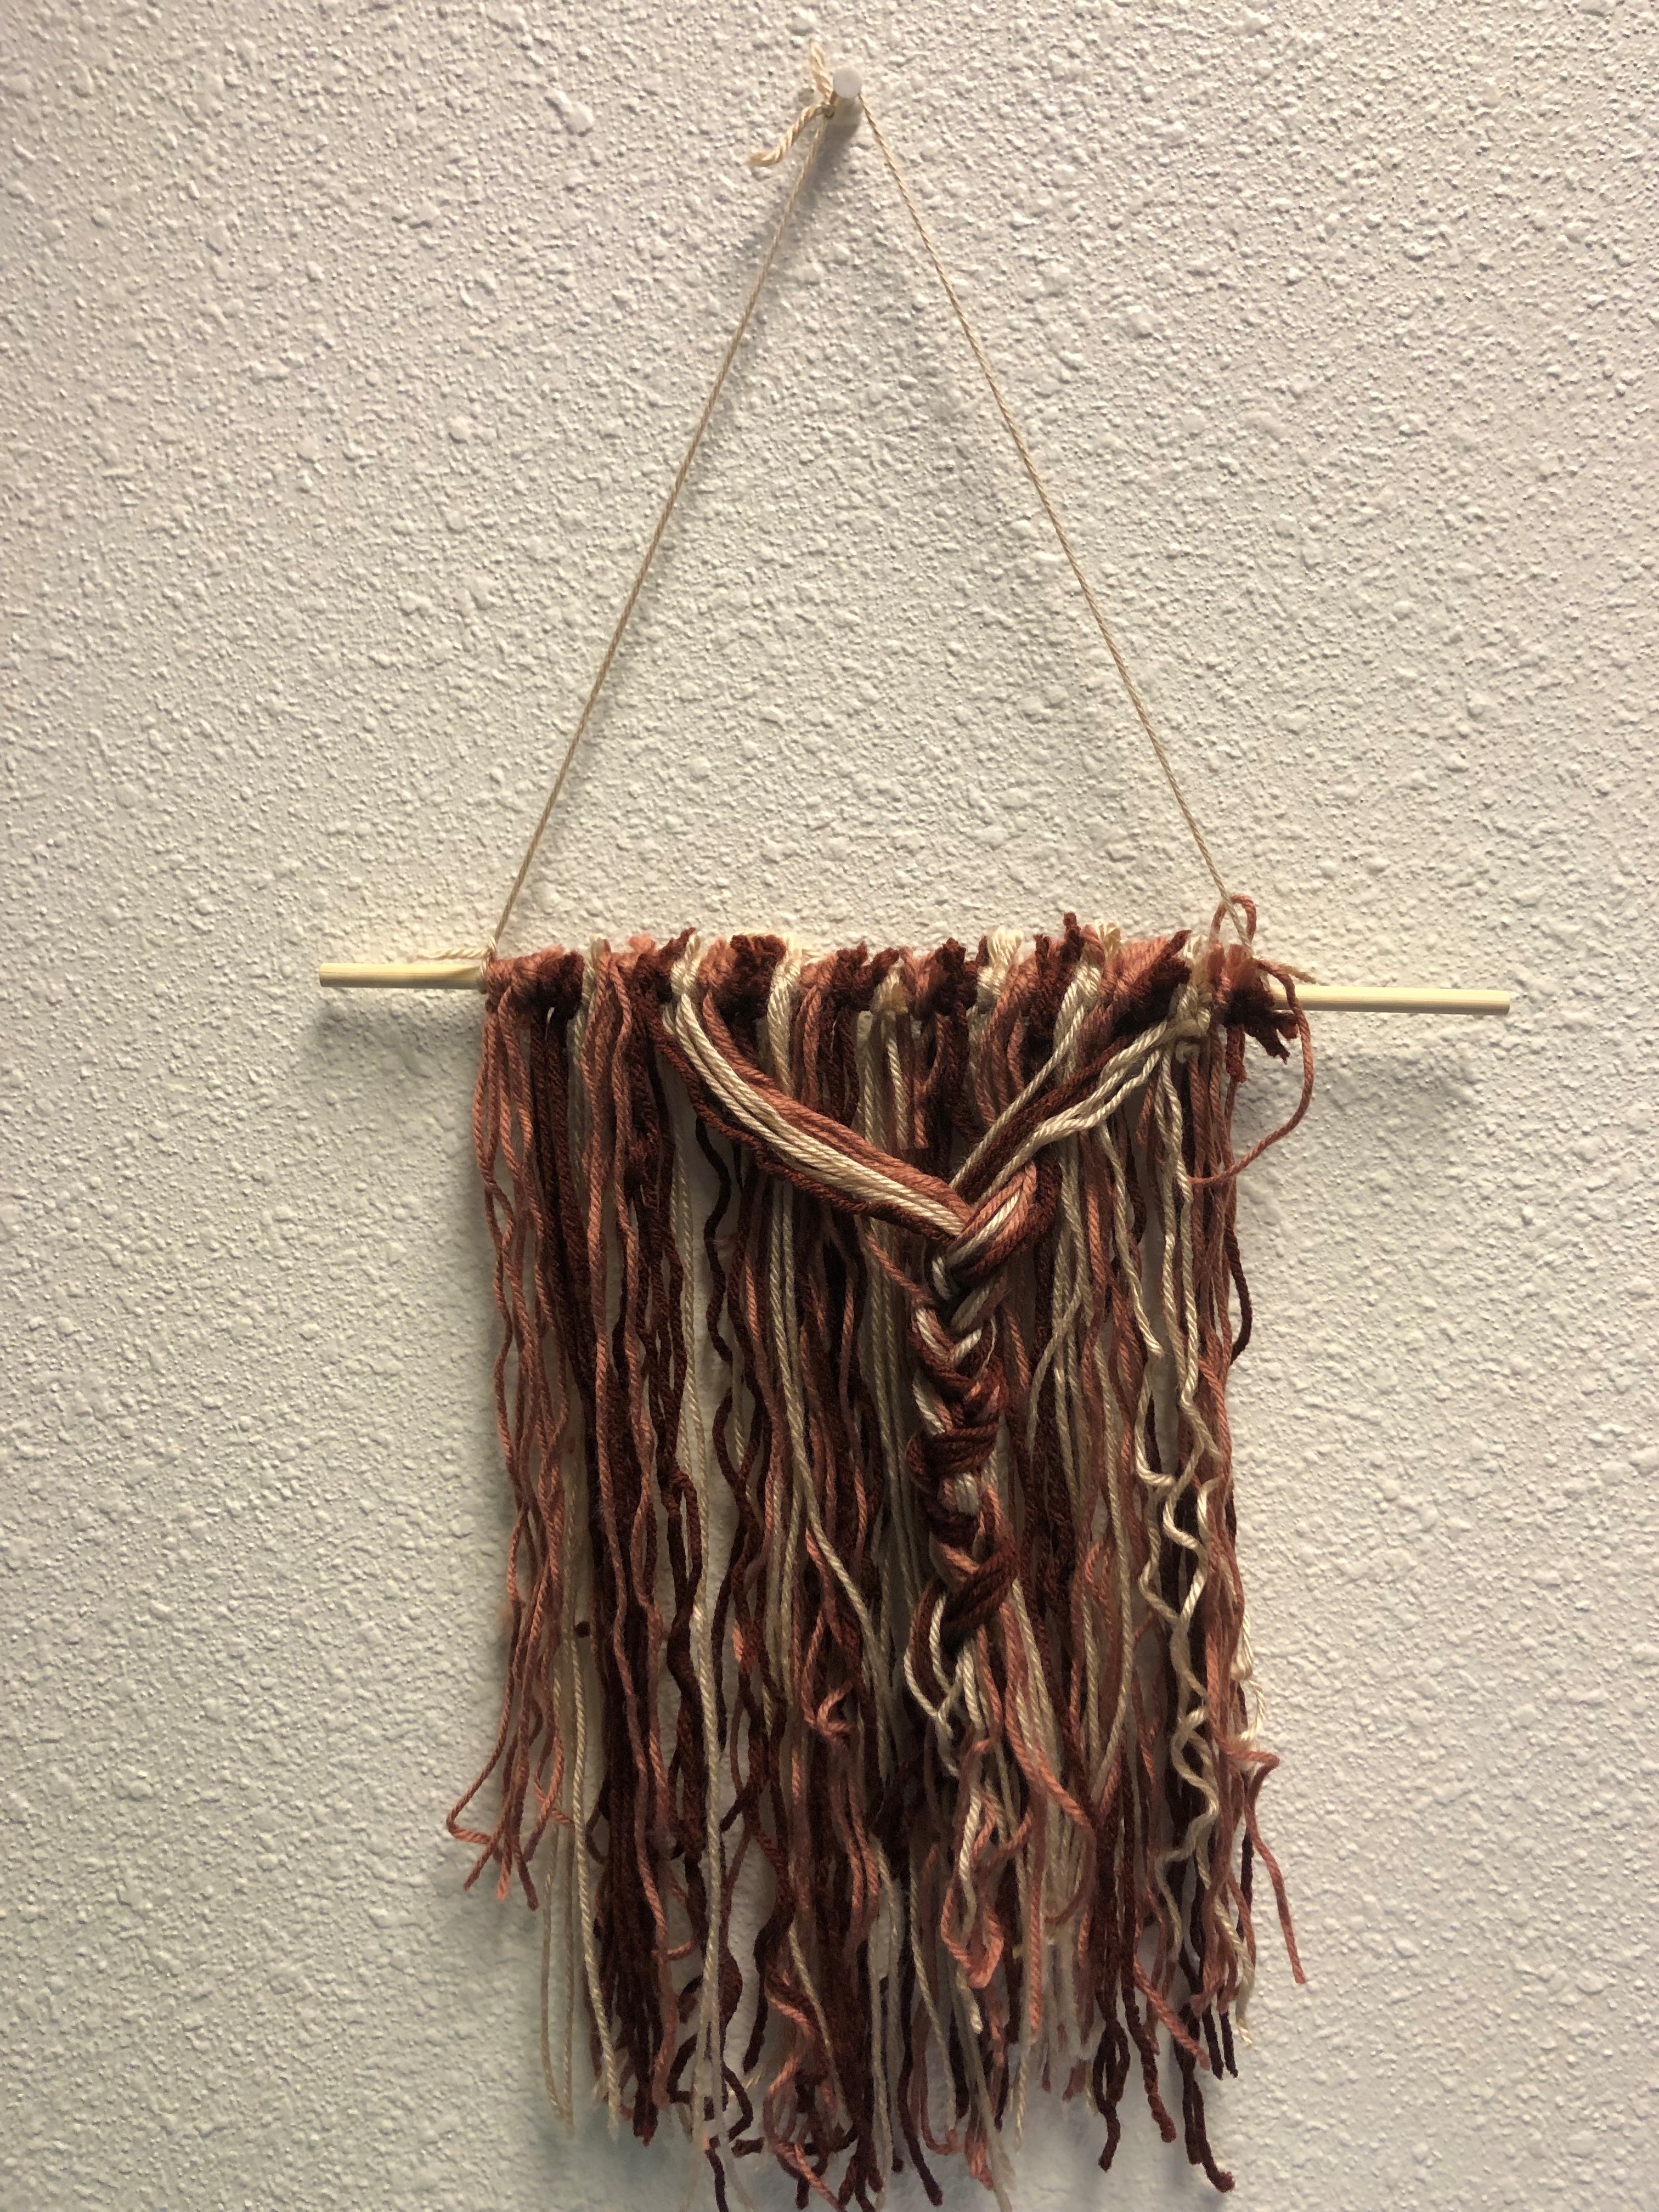 Rust, coral, and beige yarn hanging with braid in middle